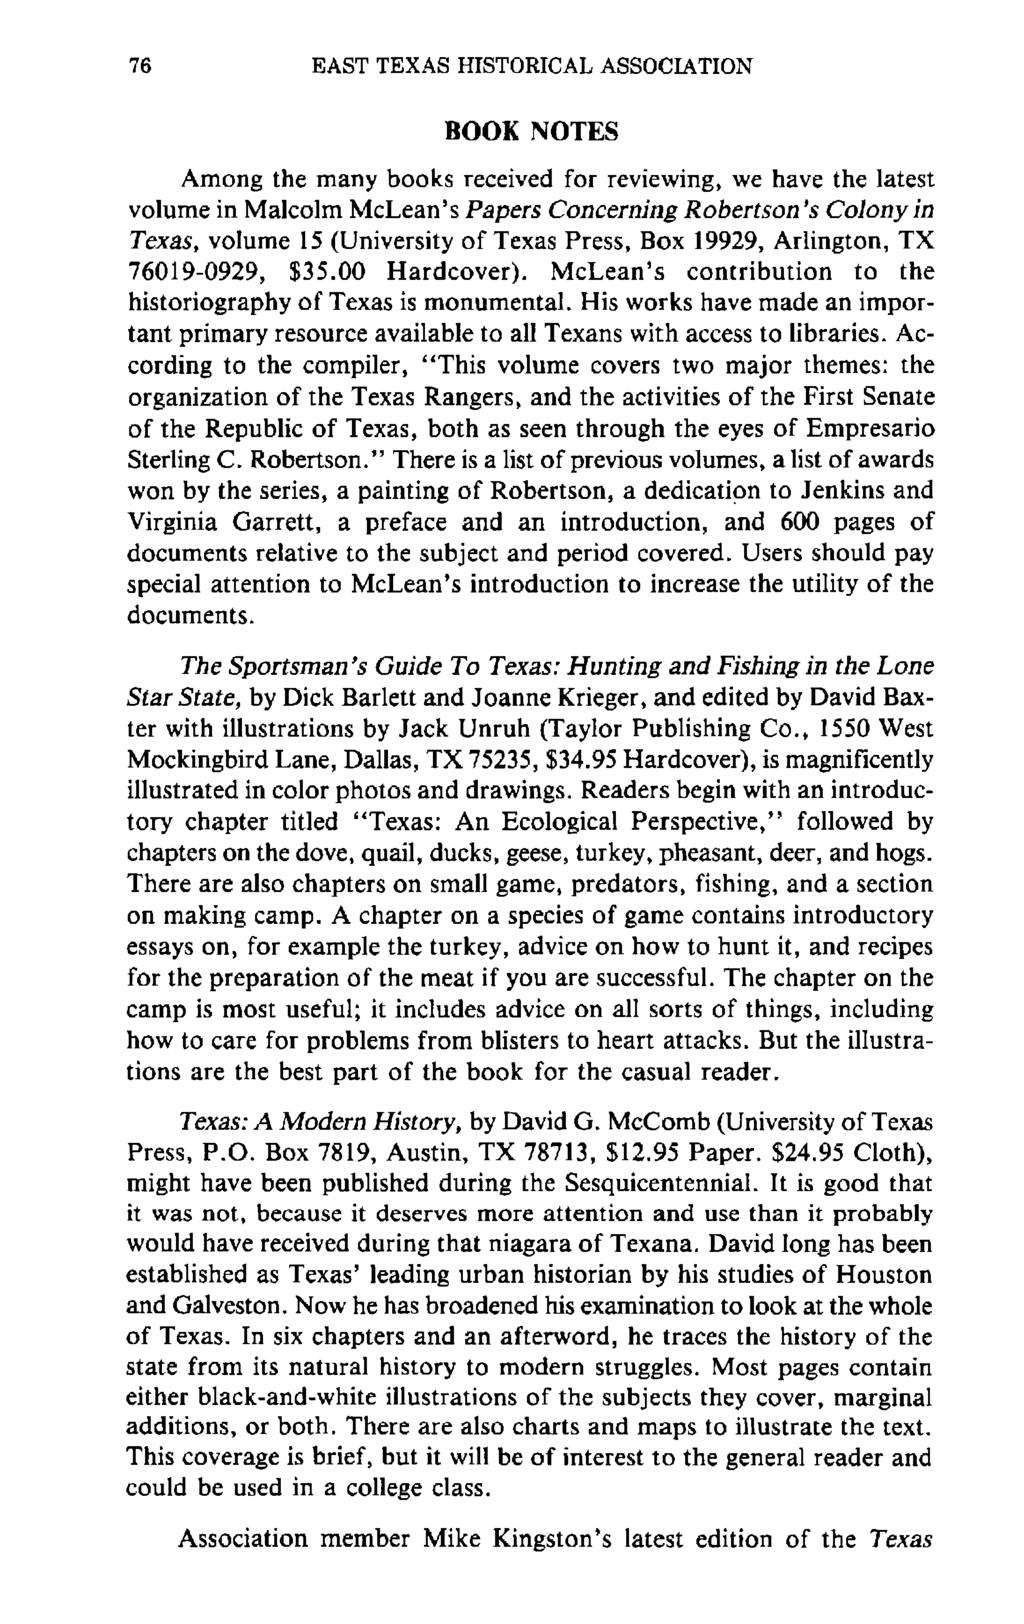 76 EAST TEXAS HISTORICAL ASSOCIATION BOOK NOTES Among the many books received for reviewing, we have the latest volume in Malcolm McLean's Papers Concerning Robertson's Colony in Texas, volume 15